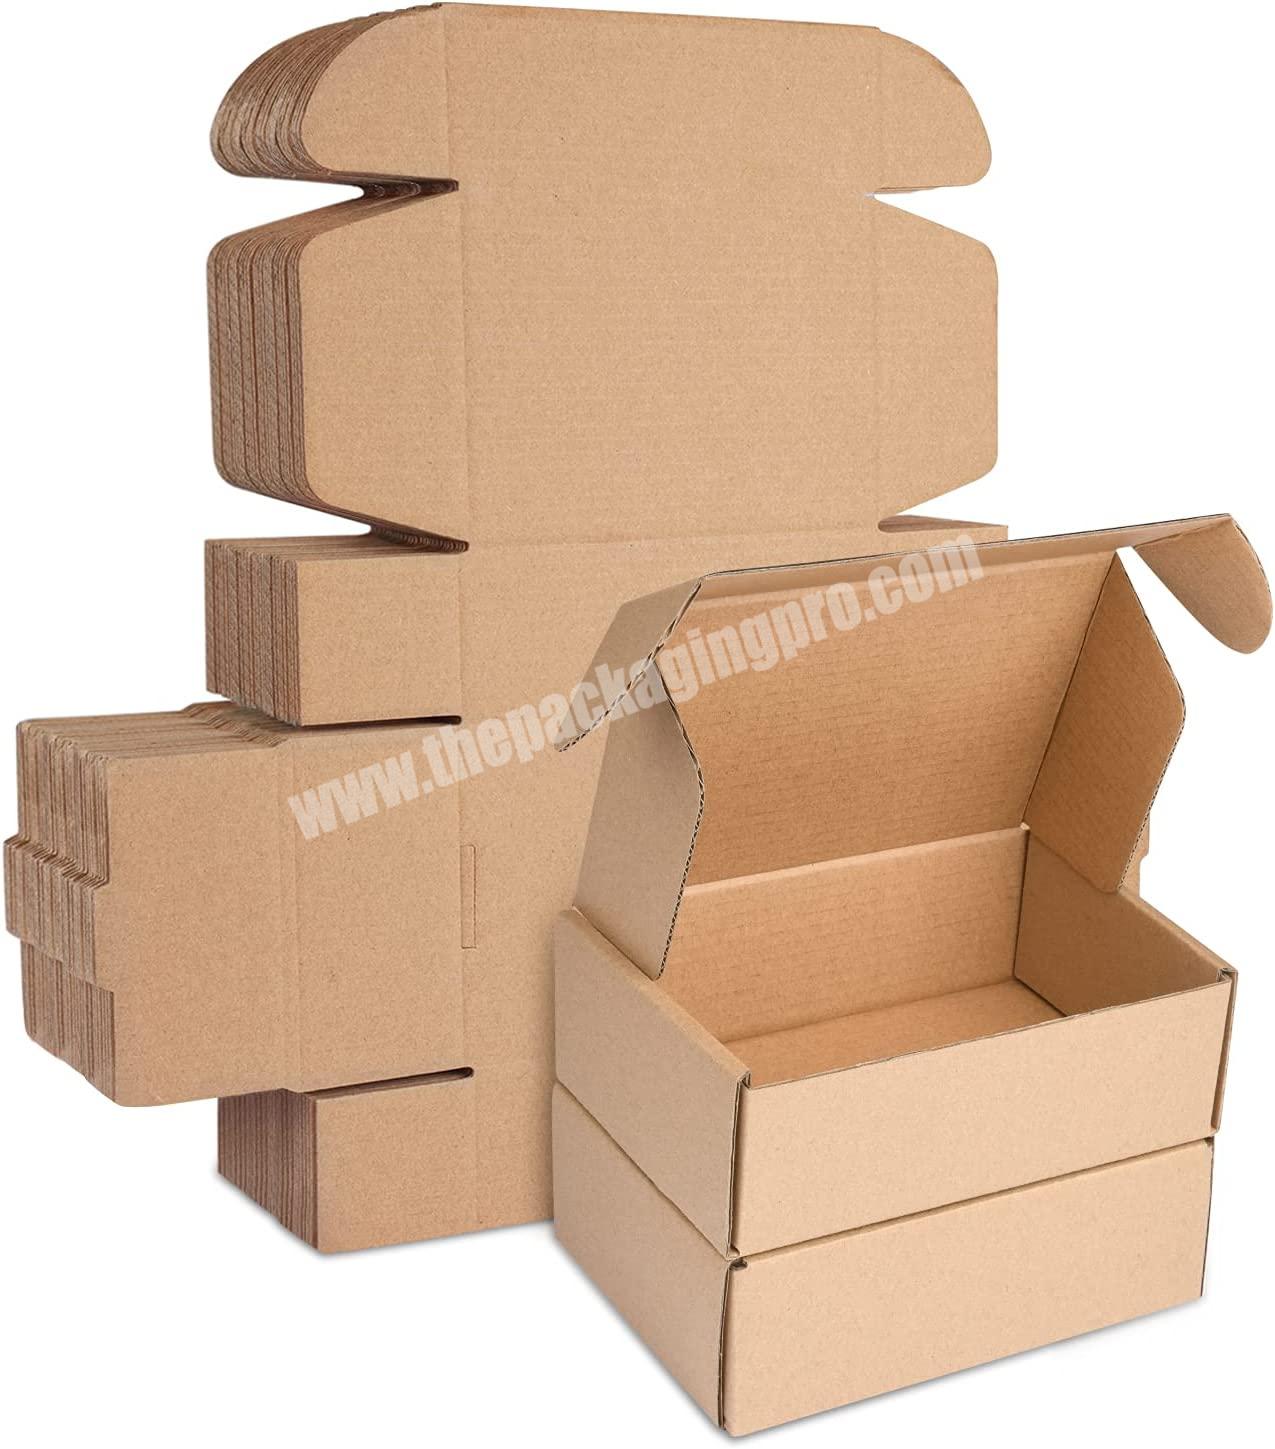 Free Design Printed Corrugated Shipping Shoe Clothing Boxes Cardboard Business Packaging Paper Gift Box